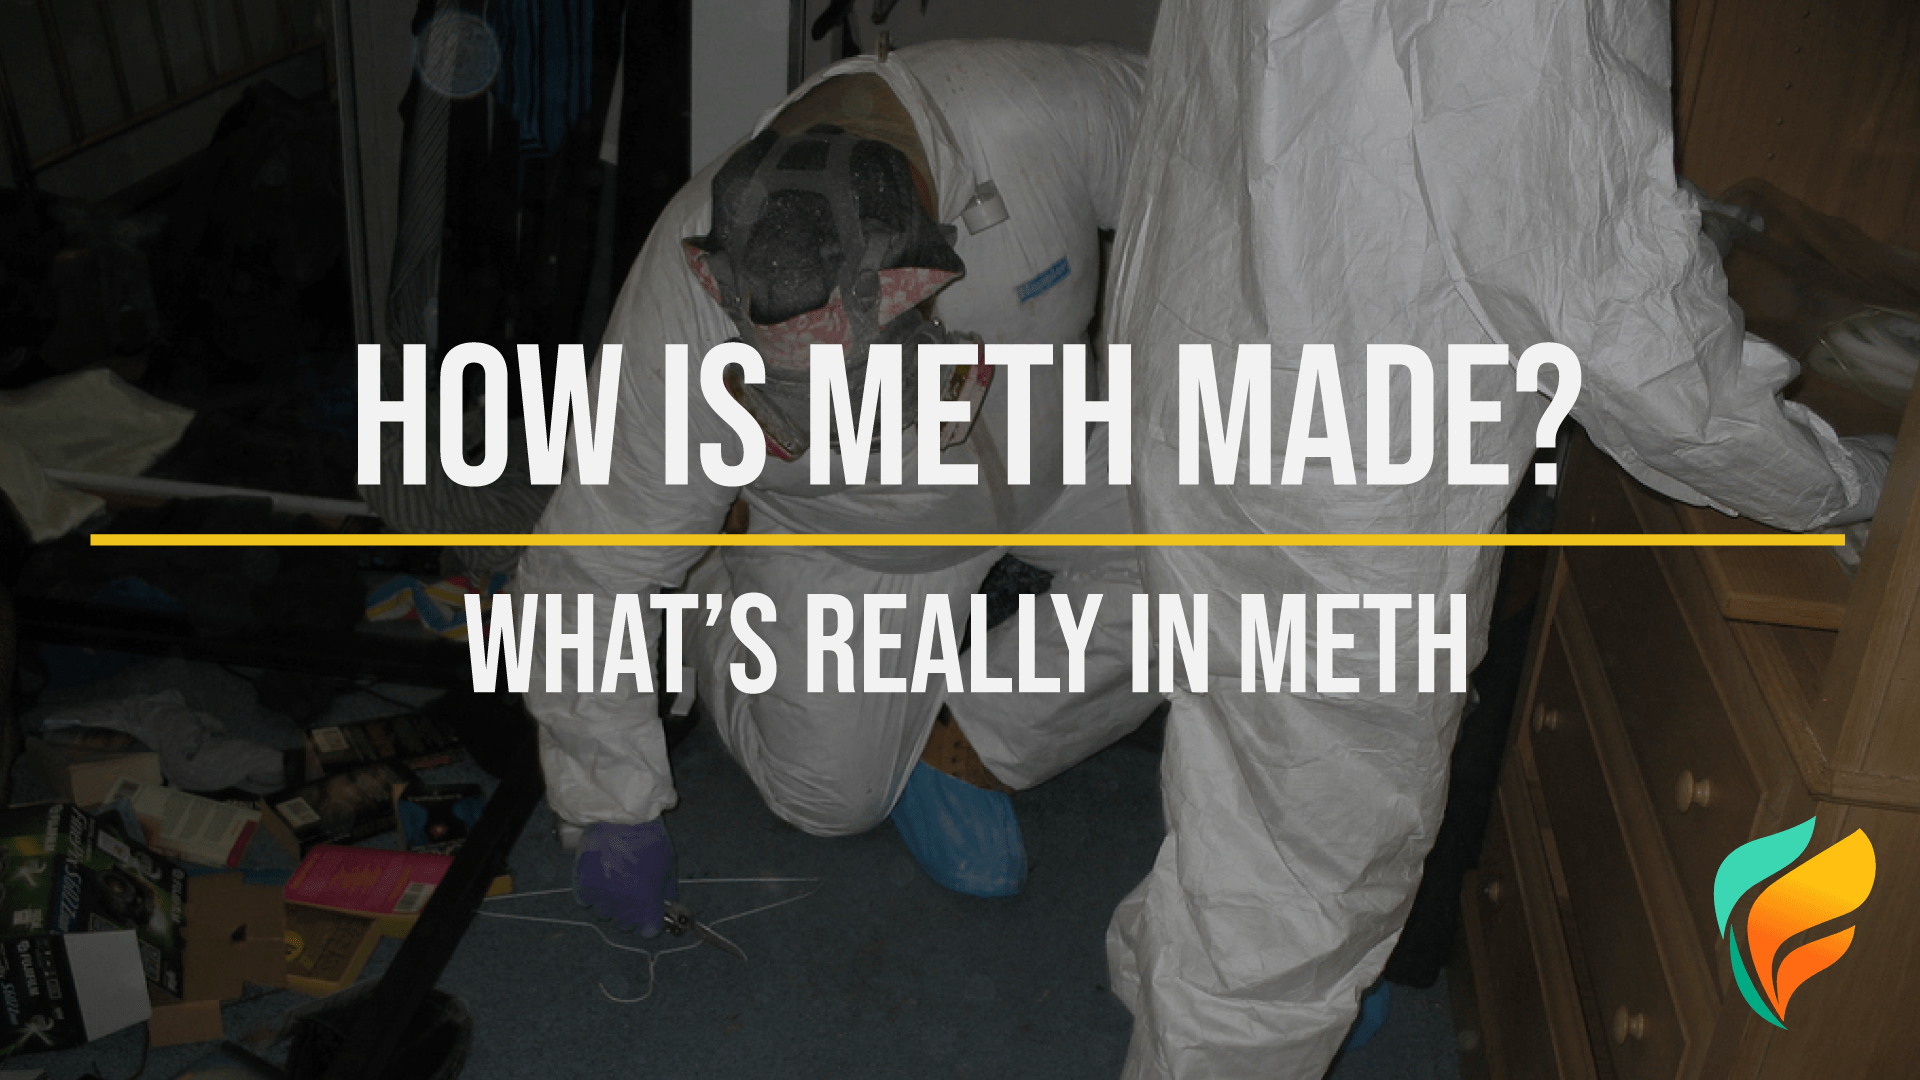 How To Make Meth: A Guide to the Toxic & Dangerous Ingredients of Methamphetamine